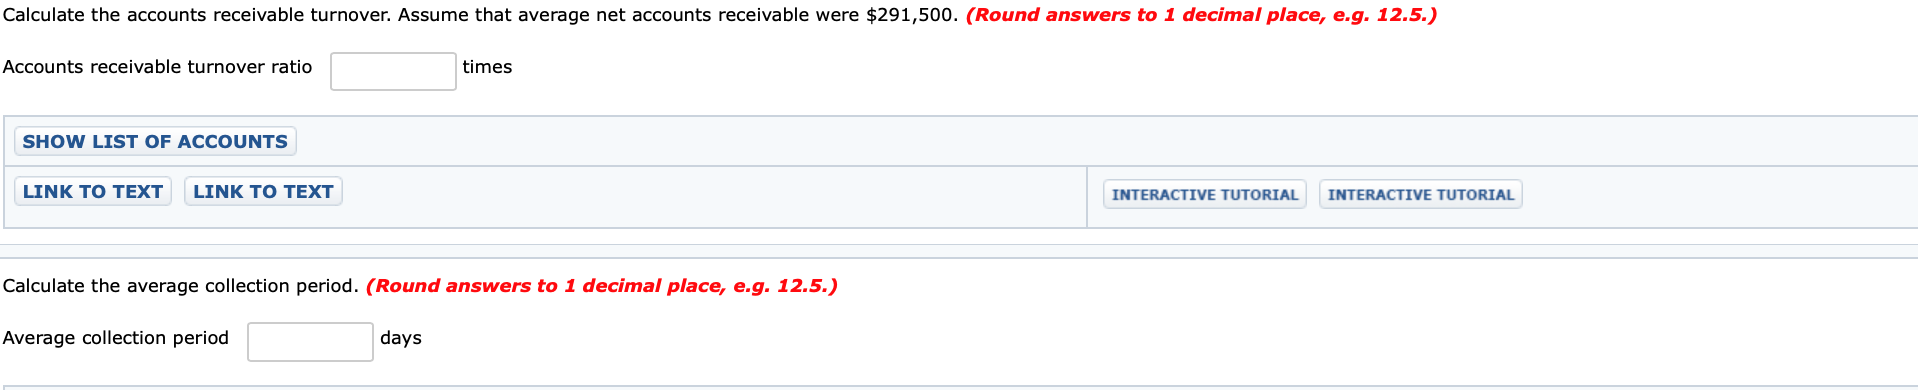 Calculate the accounts receivable turnover. Assume that average net accounts receivable were $291,500. (Round answers to 1 decimal place, e.g. 12.5.)
Accounts receivable turnover ratio
times
SHOW LIST OF ACCOUNTS
LINK TO TEXT
LINK TO TEXT
INTERACTIVE TUTORIAL
INTERACTIVE TUTORIAL
Calculate the average collection period. (Round answers to 1 decimal place, e.g. 12.5.)
Average collection period
days
